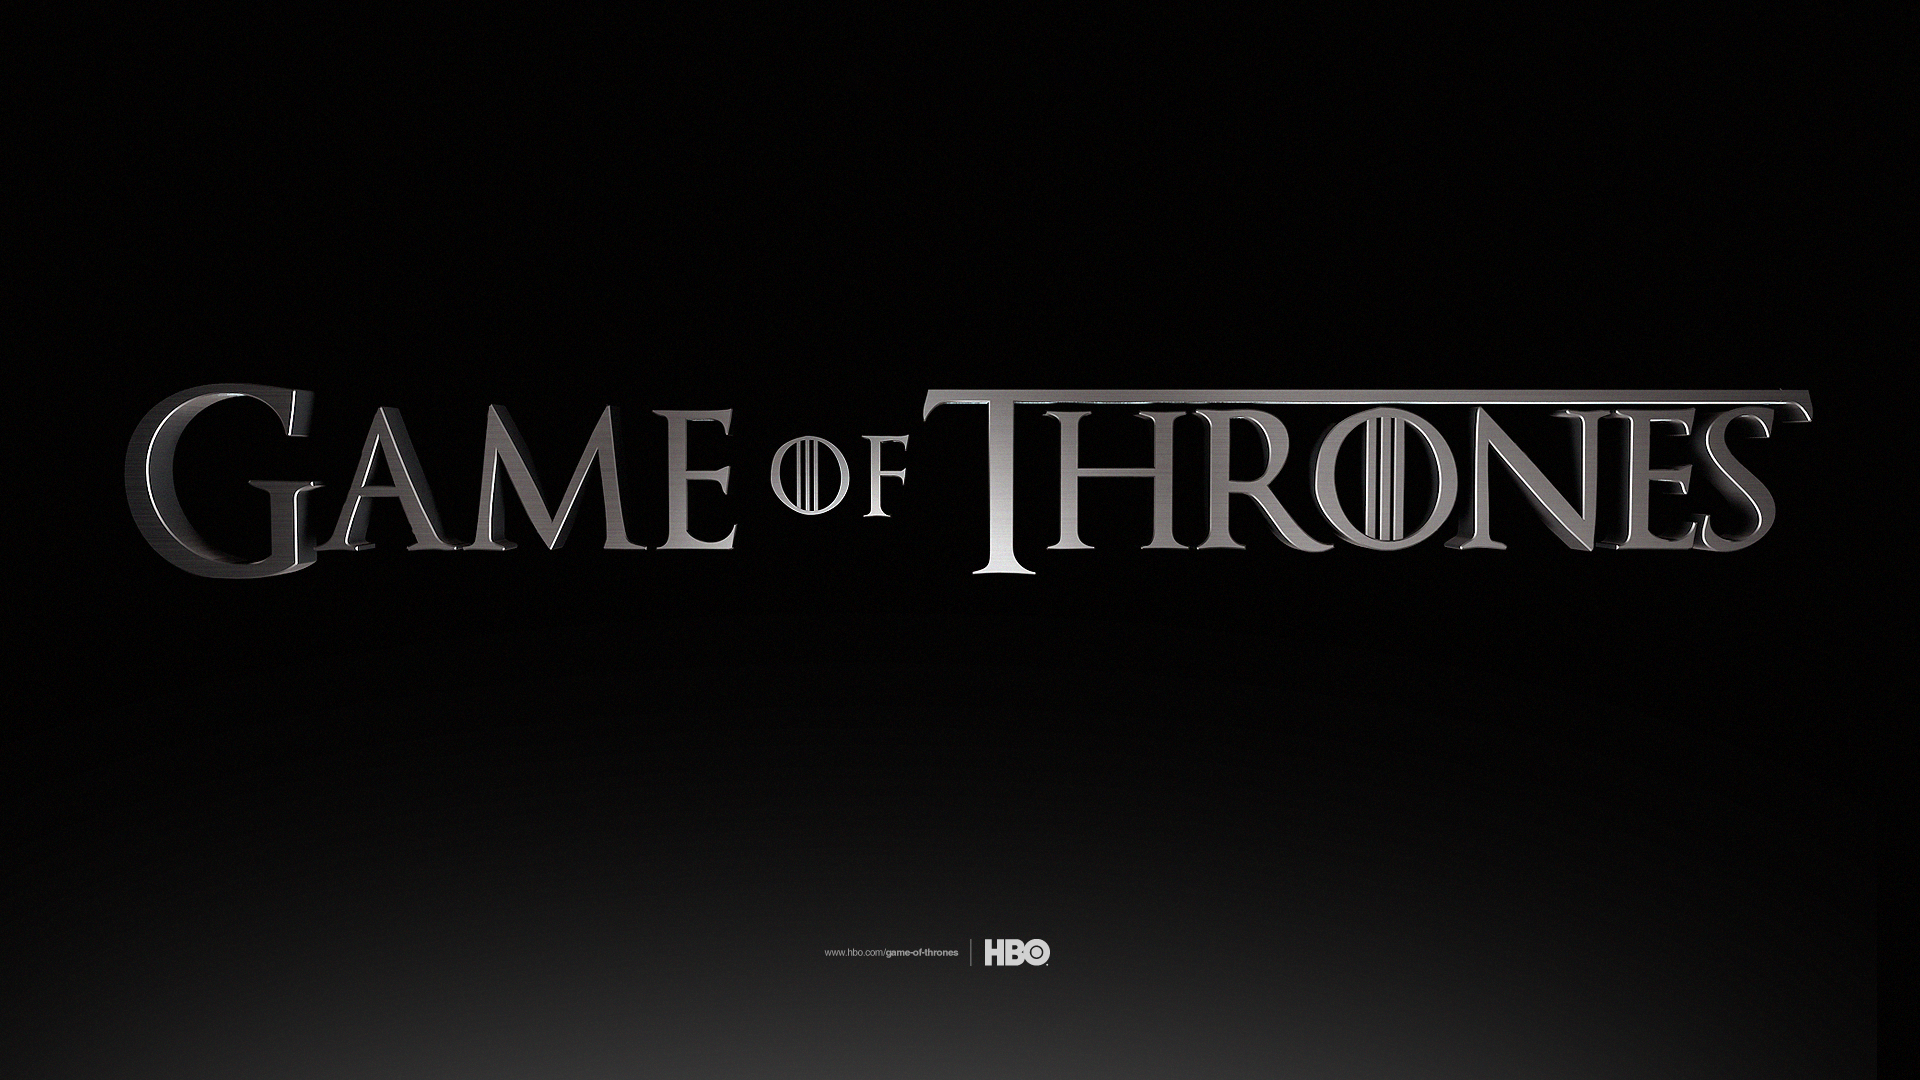 Game Of Thrones Tv Series HBO Monochrome 1920x1080